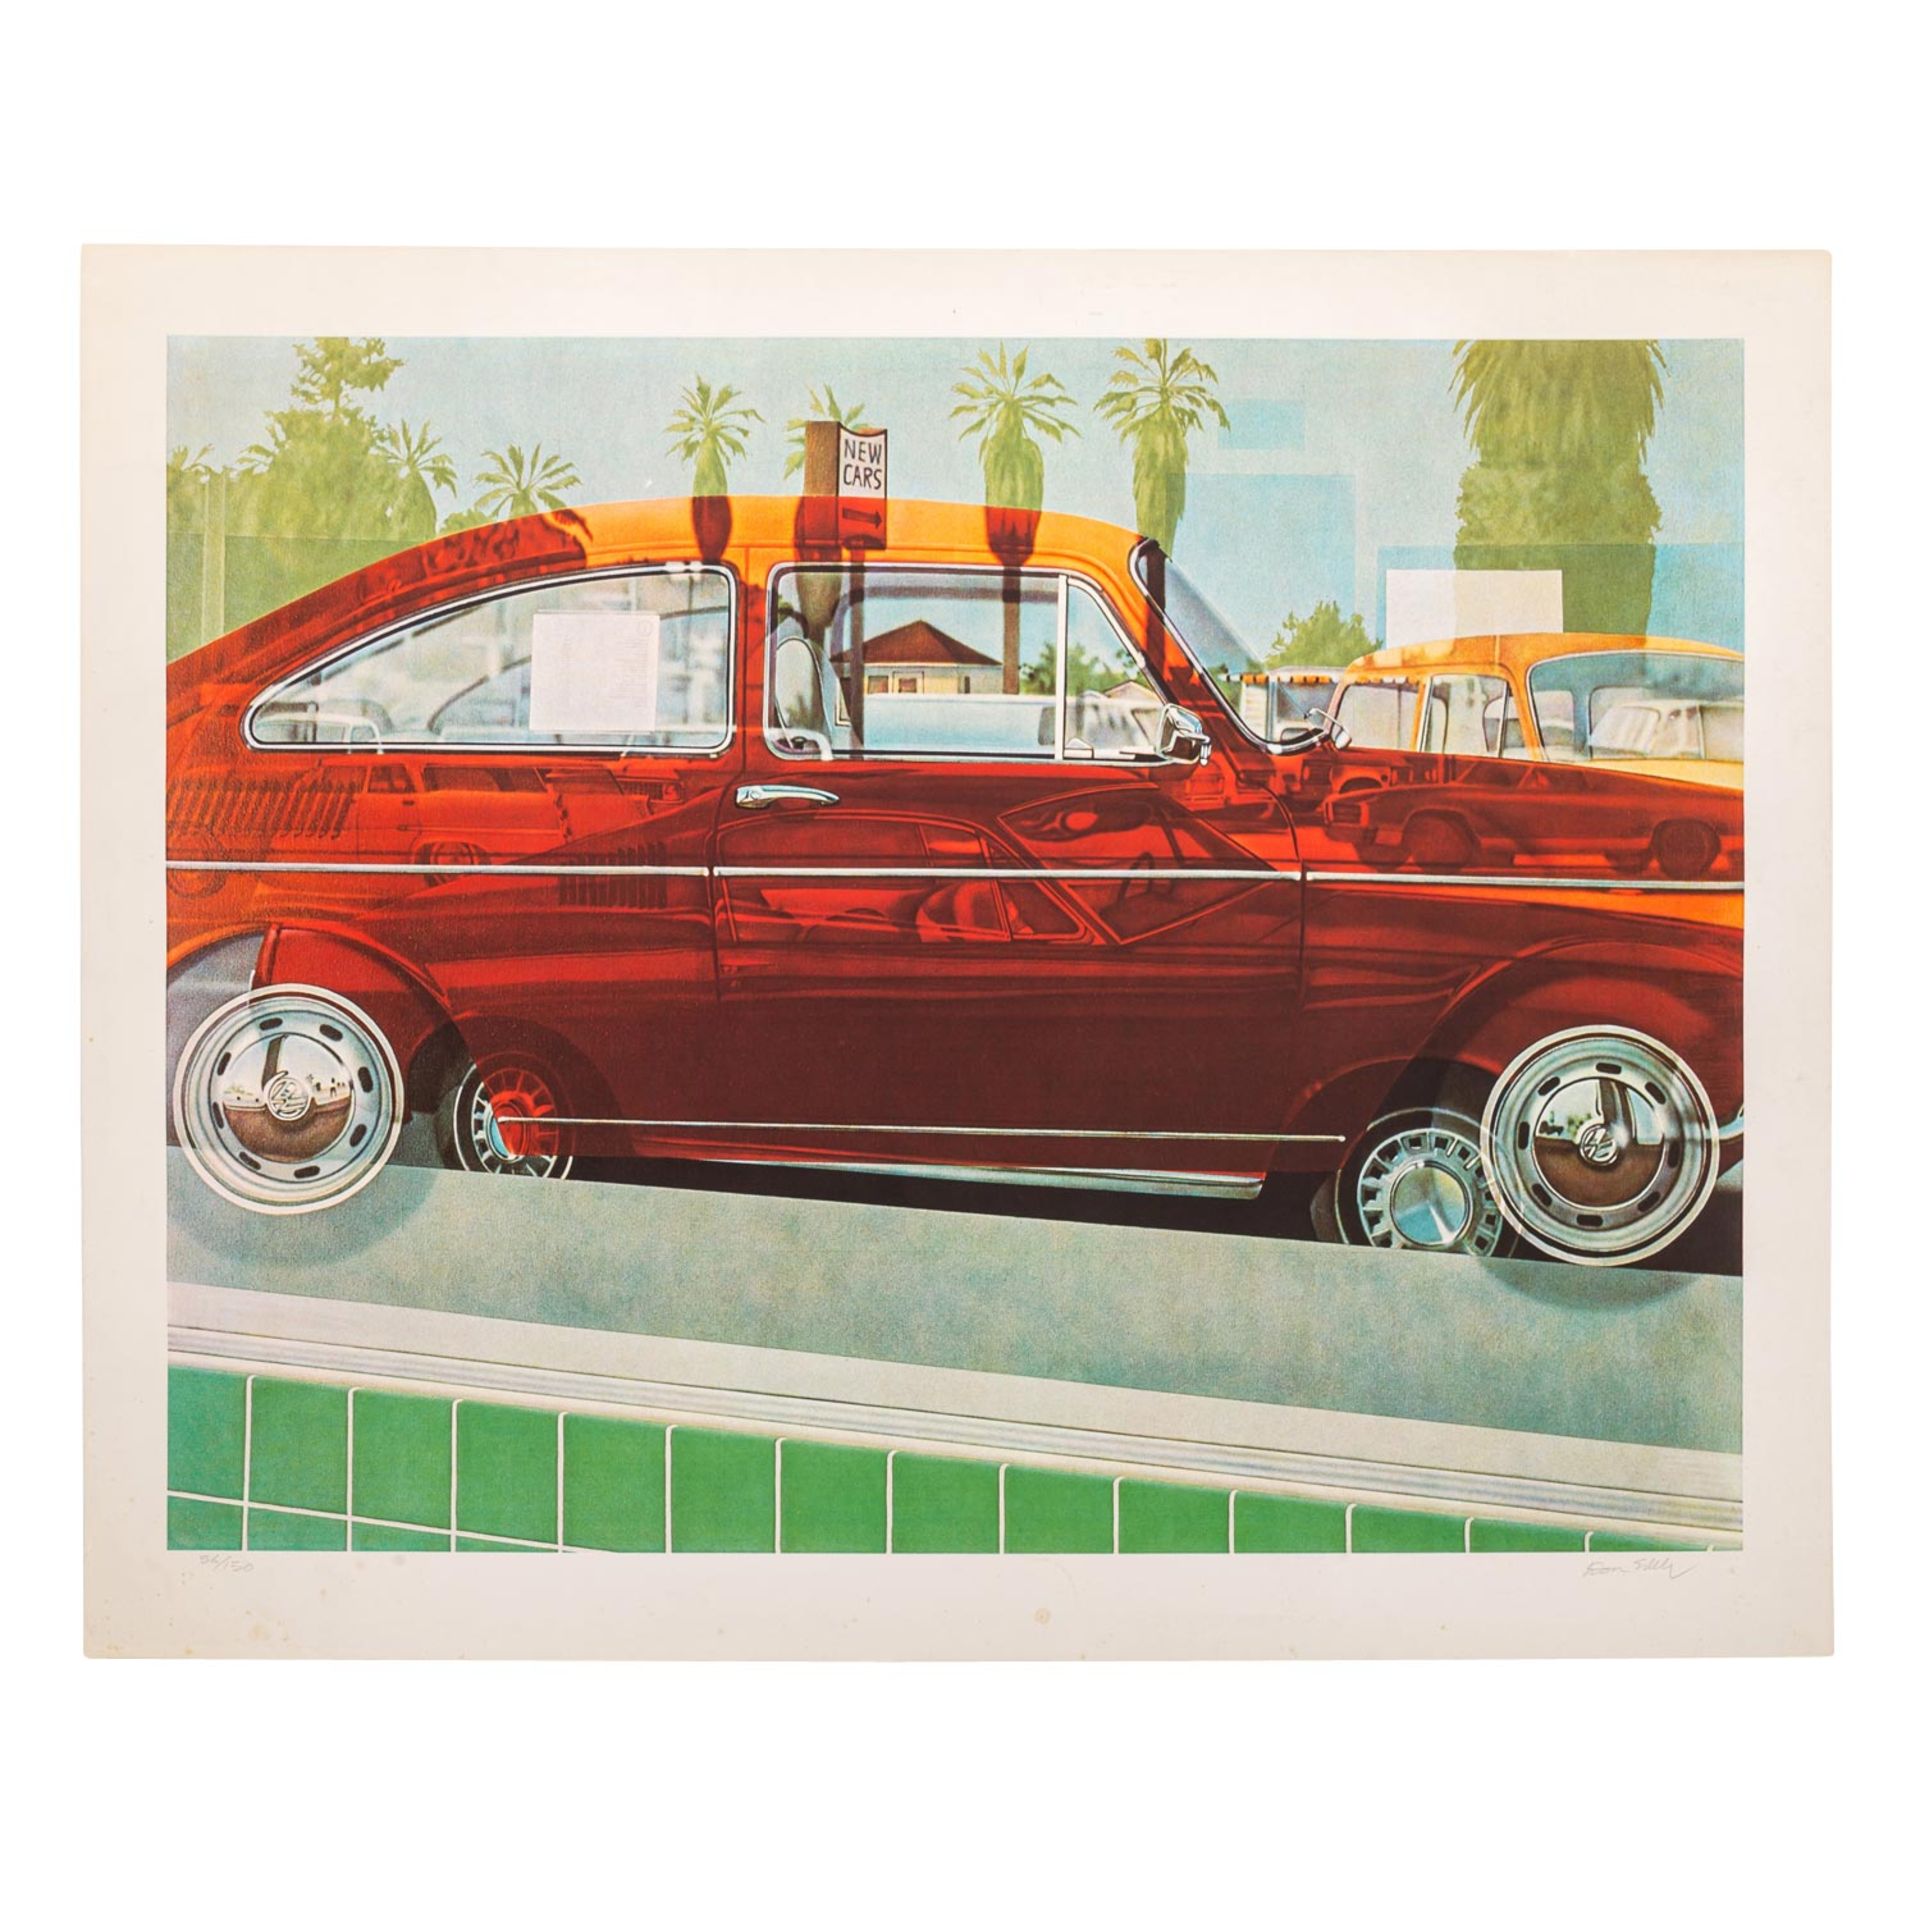 EDDY, DON (1944) "VW Showroom Window" Offsetlithographie, sig., Ex. 56/150, HxB: 53,5/70 cm,